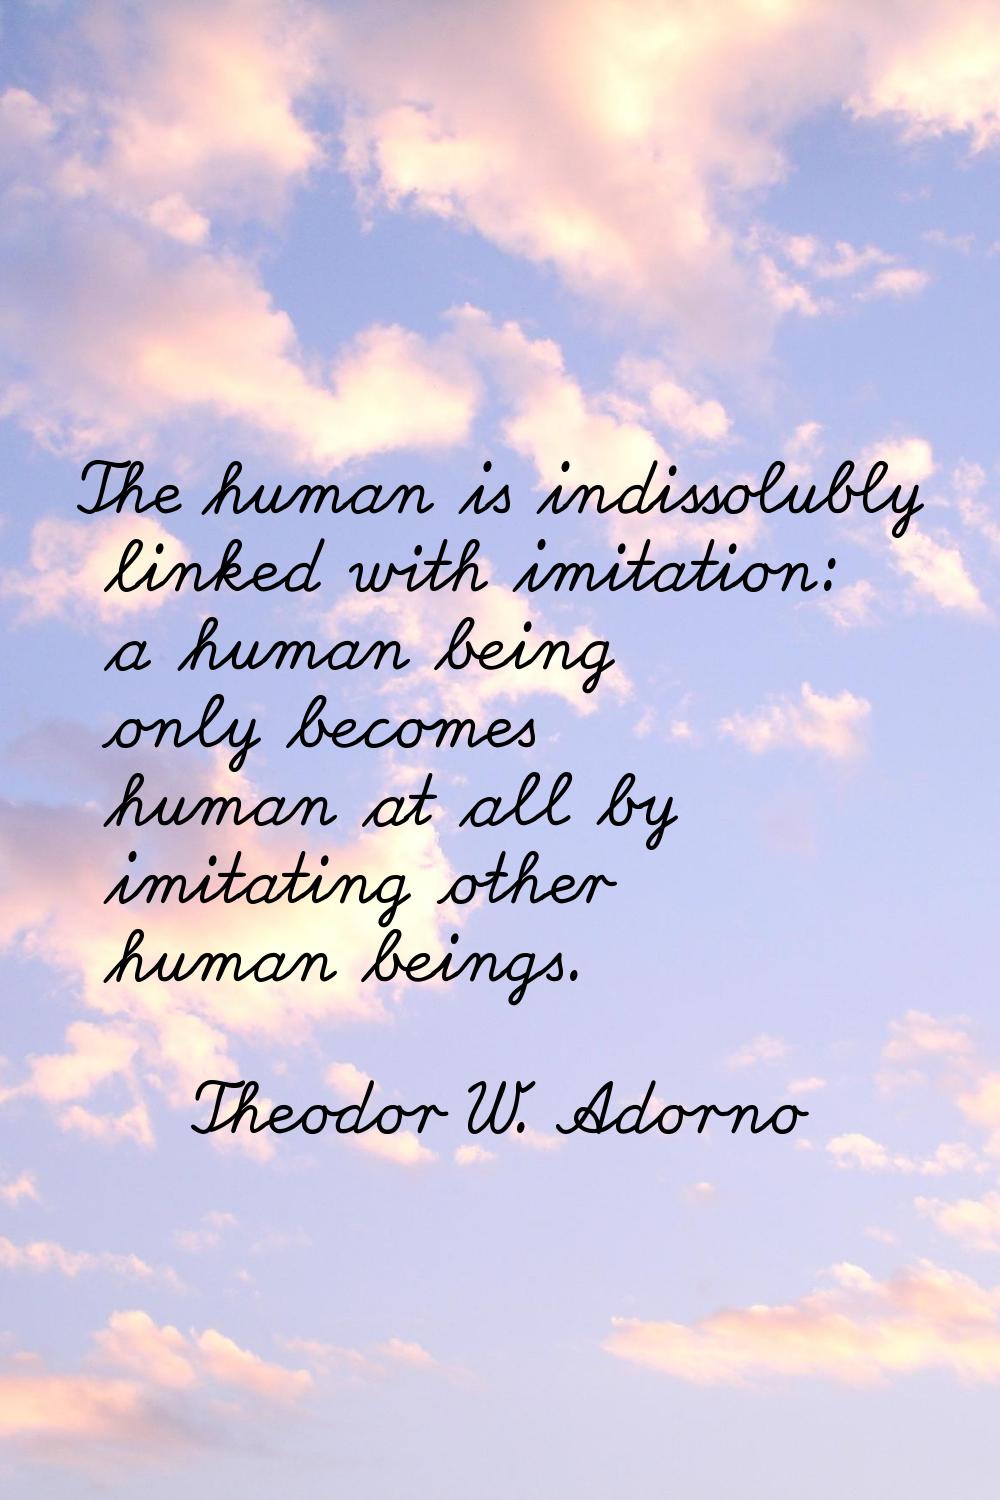 The human is indissolubly linked with imitation: a human being only becomes human at all by imitati